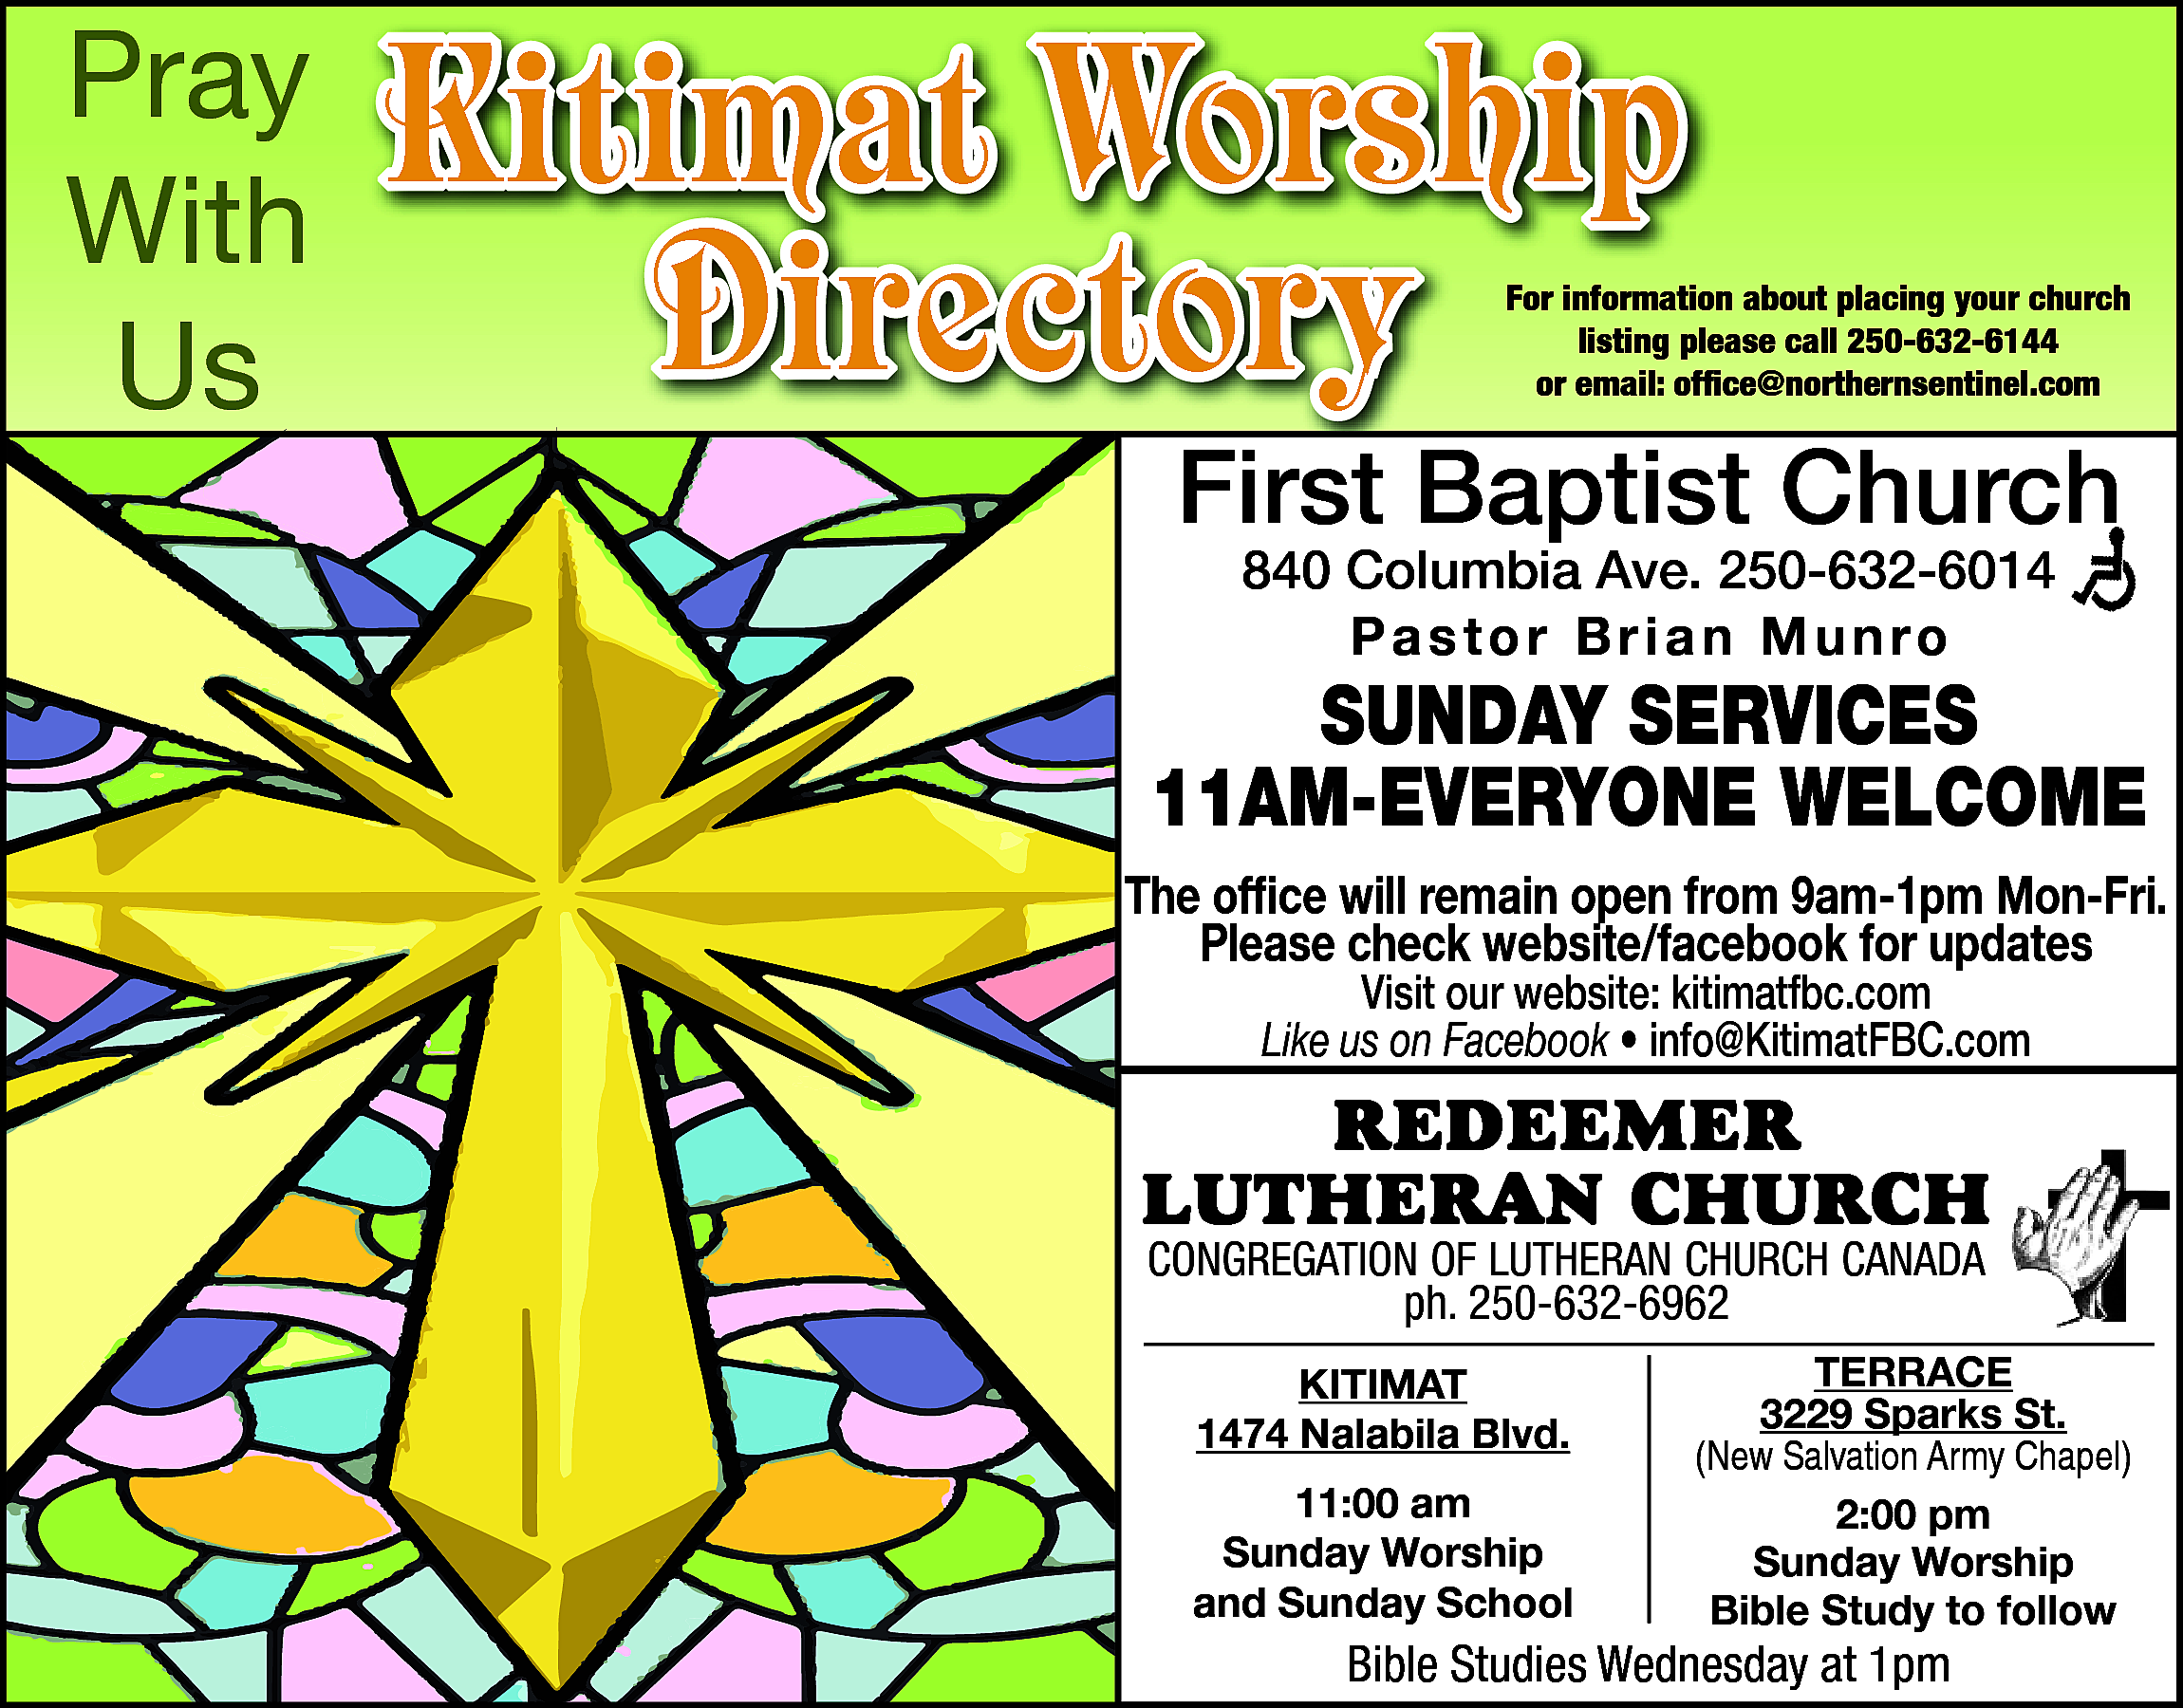 Pray <br>With <br>Us <br> <br>Kitimat  Pray  With  Us    Kitimat Worship  Directory    For information about placing your church  listing please call 250-632-6144  or email: office@northernsentinel.com    First Baptist Church  840 Columbia Ave. 250-632-6014  Pastor Brian Munro    SUNDAY SERVICES  11AM-EVERYONE WELCOME  The office will remain open from 9am-1pm Mon-Fri.  Please check website/facebook for updates  Visit our website: kitimatfbc.com  Like us on Facebook • info@KitimatFBC.com    RedeemeR  LutheRan ChuRCh  Congregation of Lutheran ChurCh Canada  ph. 250-632-6962  ph. 250-632-6962  • Pastor Alan Visser  Kitimat  Kitimat  1474 Nalabila Blvd.    1474 Nalabila Blvd.  11:00 am  11:00  am  Sunday Worship  Sunday  Worship  and Sunday School    terrace  3229  Sparks St.  terrace  (New Salvation Army Chapel)  3229 Sparks St.  2:00 pm  (NewSunday  SalvationWorship  Army Chapel)  Bible Study to follow    Bible  on Facebook  BibleStudies  StudiesAvailable  Wednesday  at 1pm    